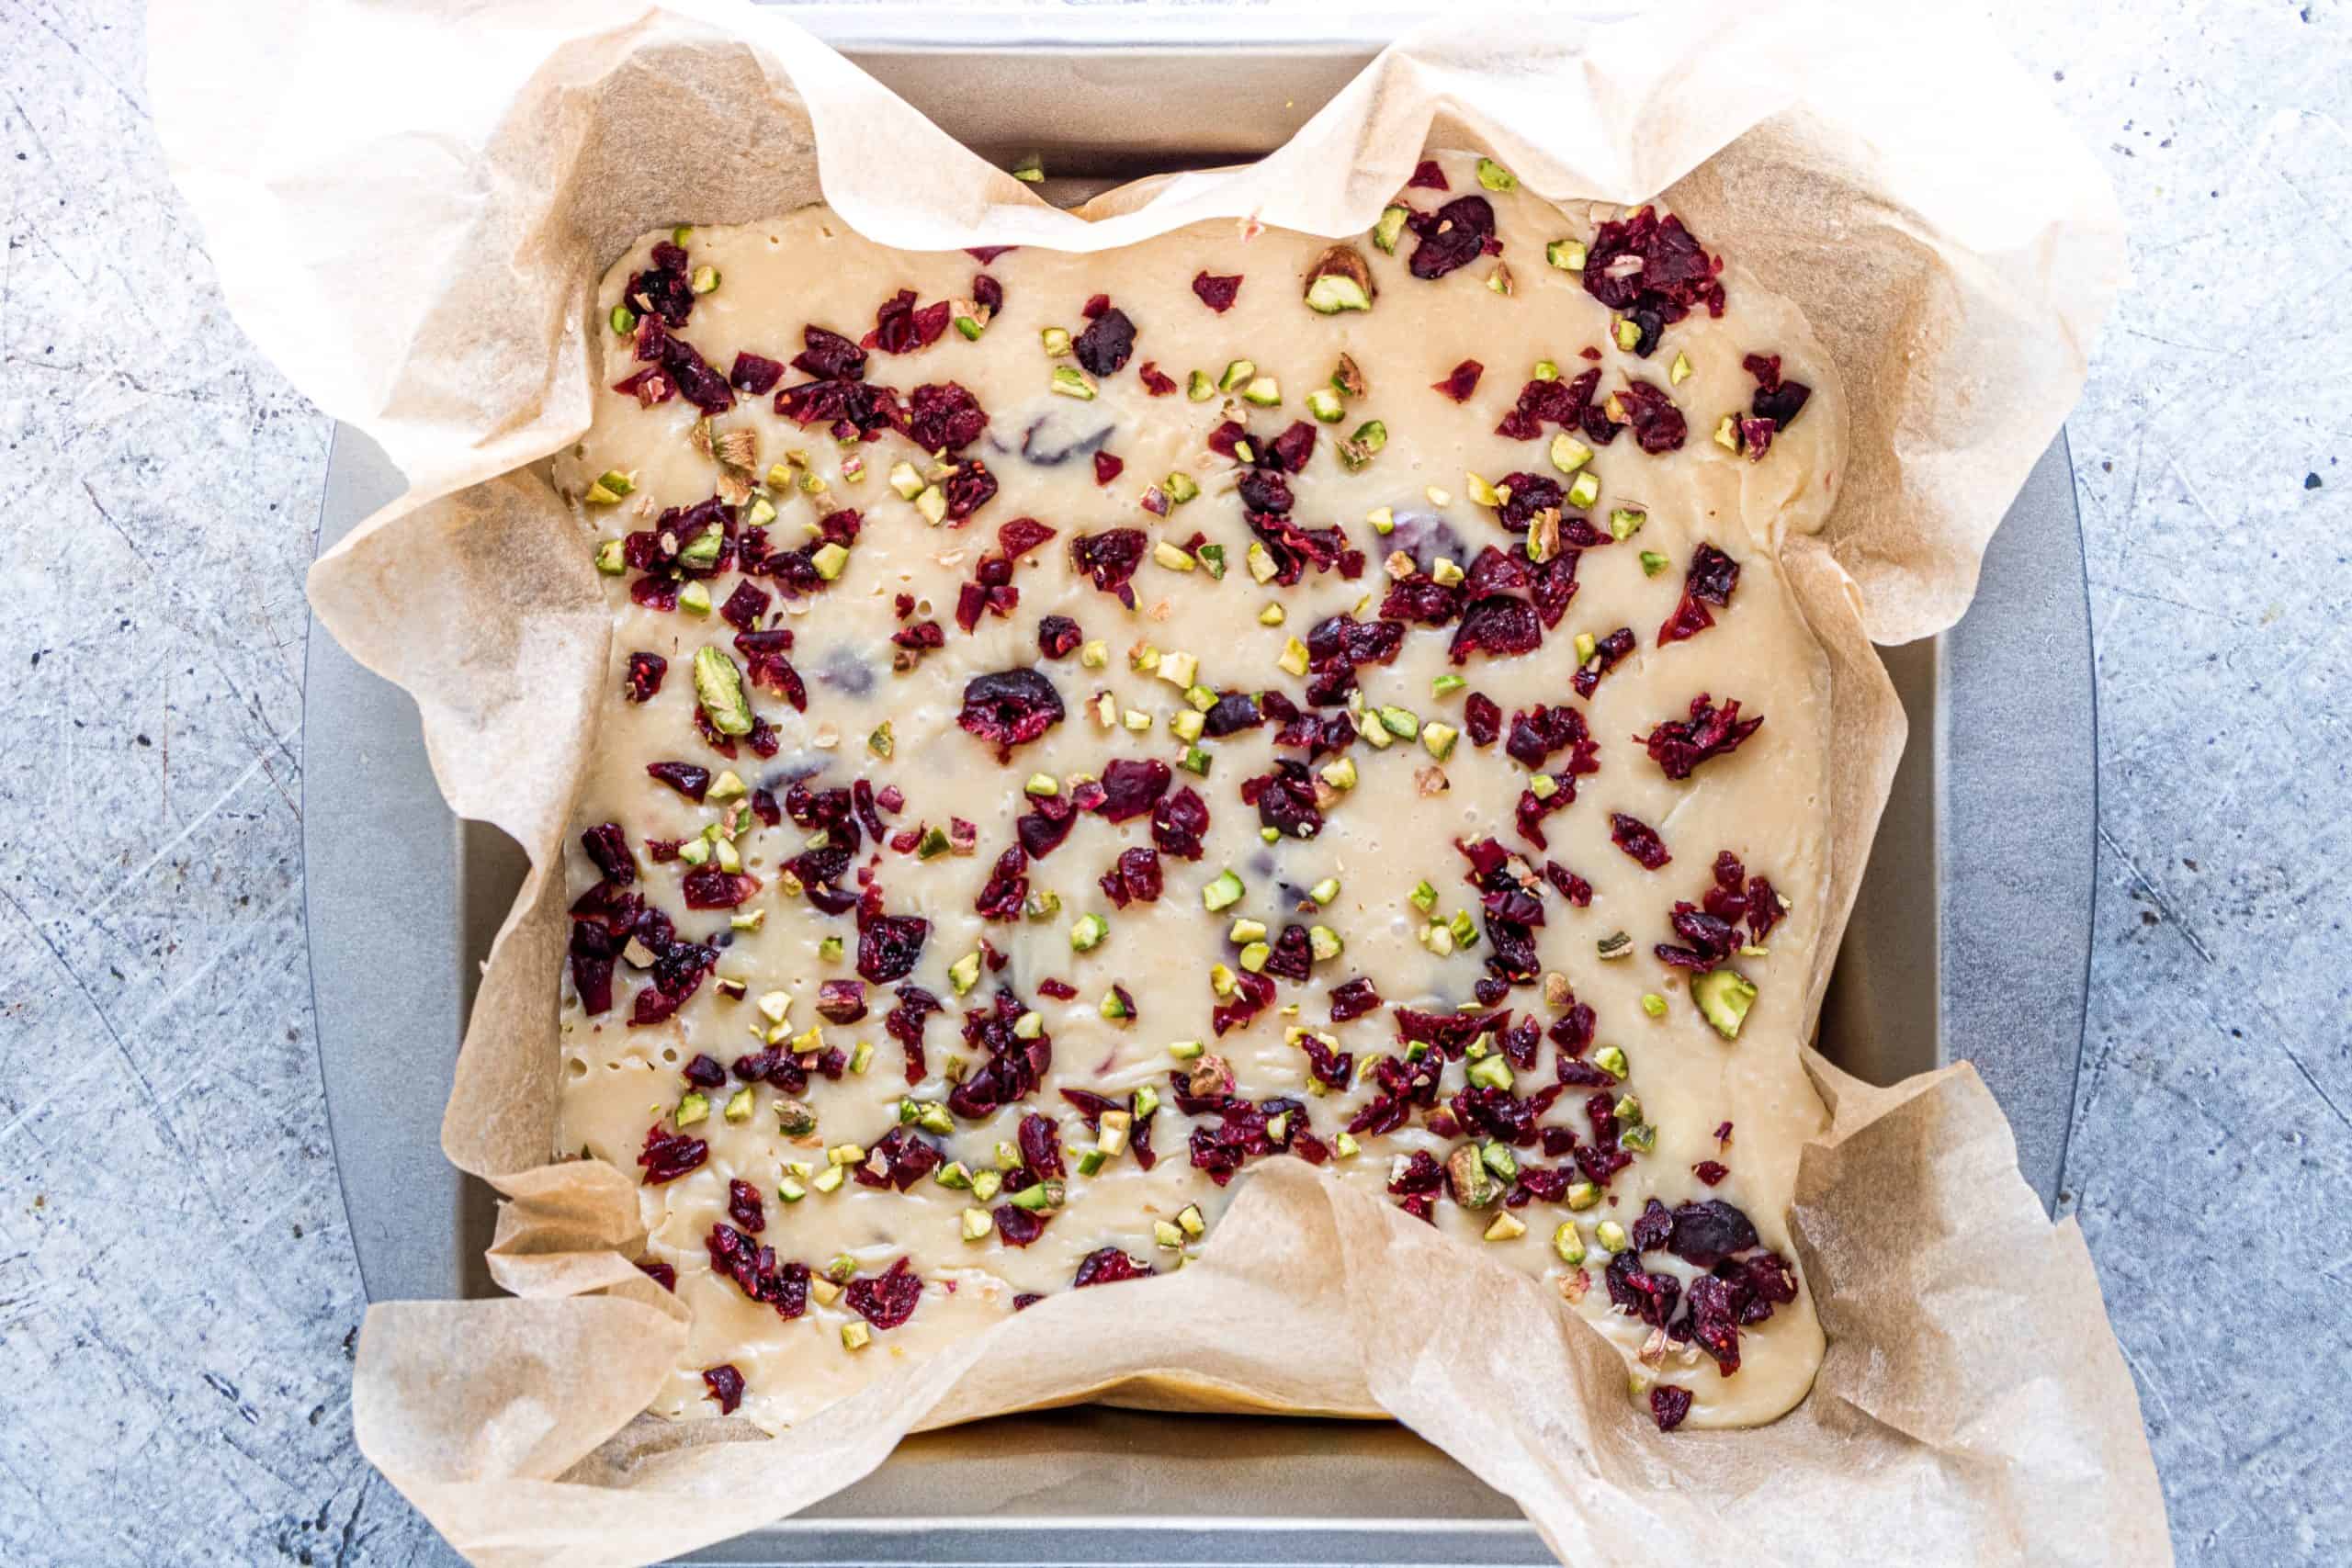 dried cranberries and pistachios sprinkled on top of white chocolate fudge mixture.